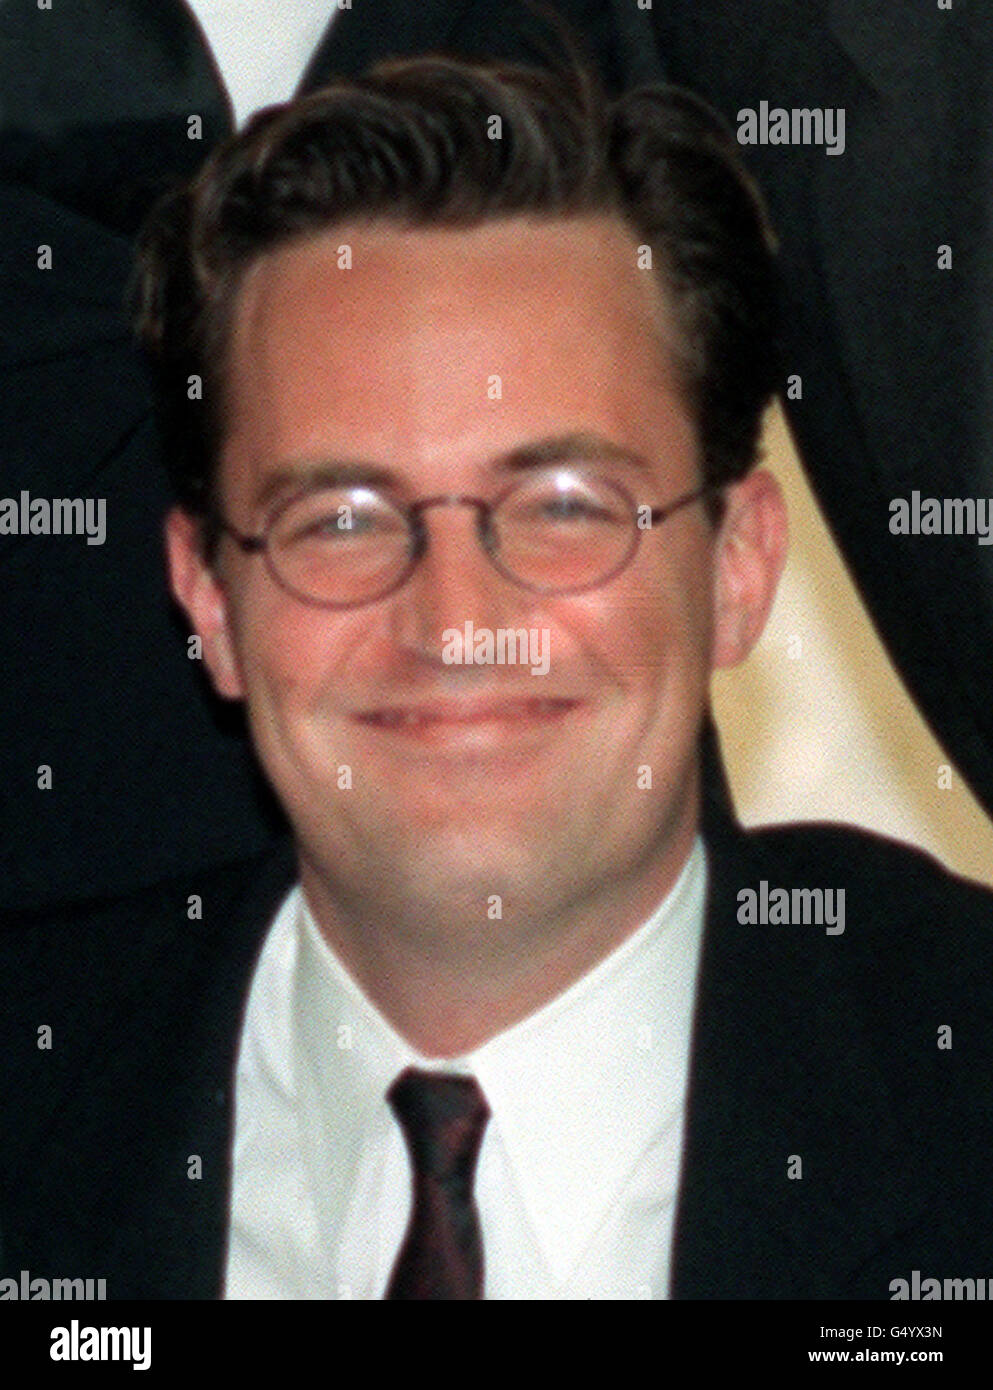 PA Photo 25/3/1998 Matthew Perry at a photocall in London where they are filming for the last episode of their current series of 'Friends' *...27/02/01 The Friends star has entered a rehabilitation clinic for treatment of a mystery condition, it was confirmed. 'Following the advice of his doctors, Matthew Perry has entered an undisclosed rehabilitation hospital,' his publicist Lisa Kasteler said. The statement offered no clues to why the 32-year-old actor needed rehabilitation or where he was being treated. Stock Photo